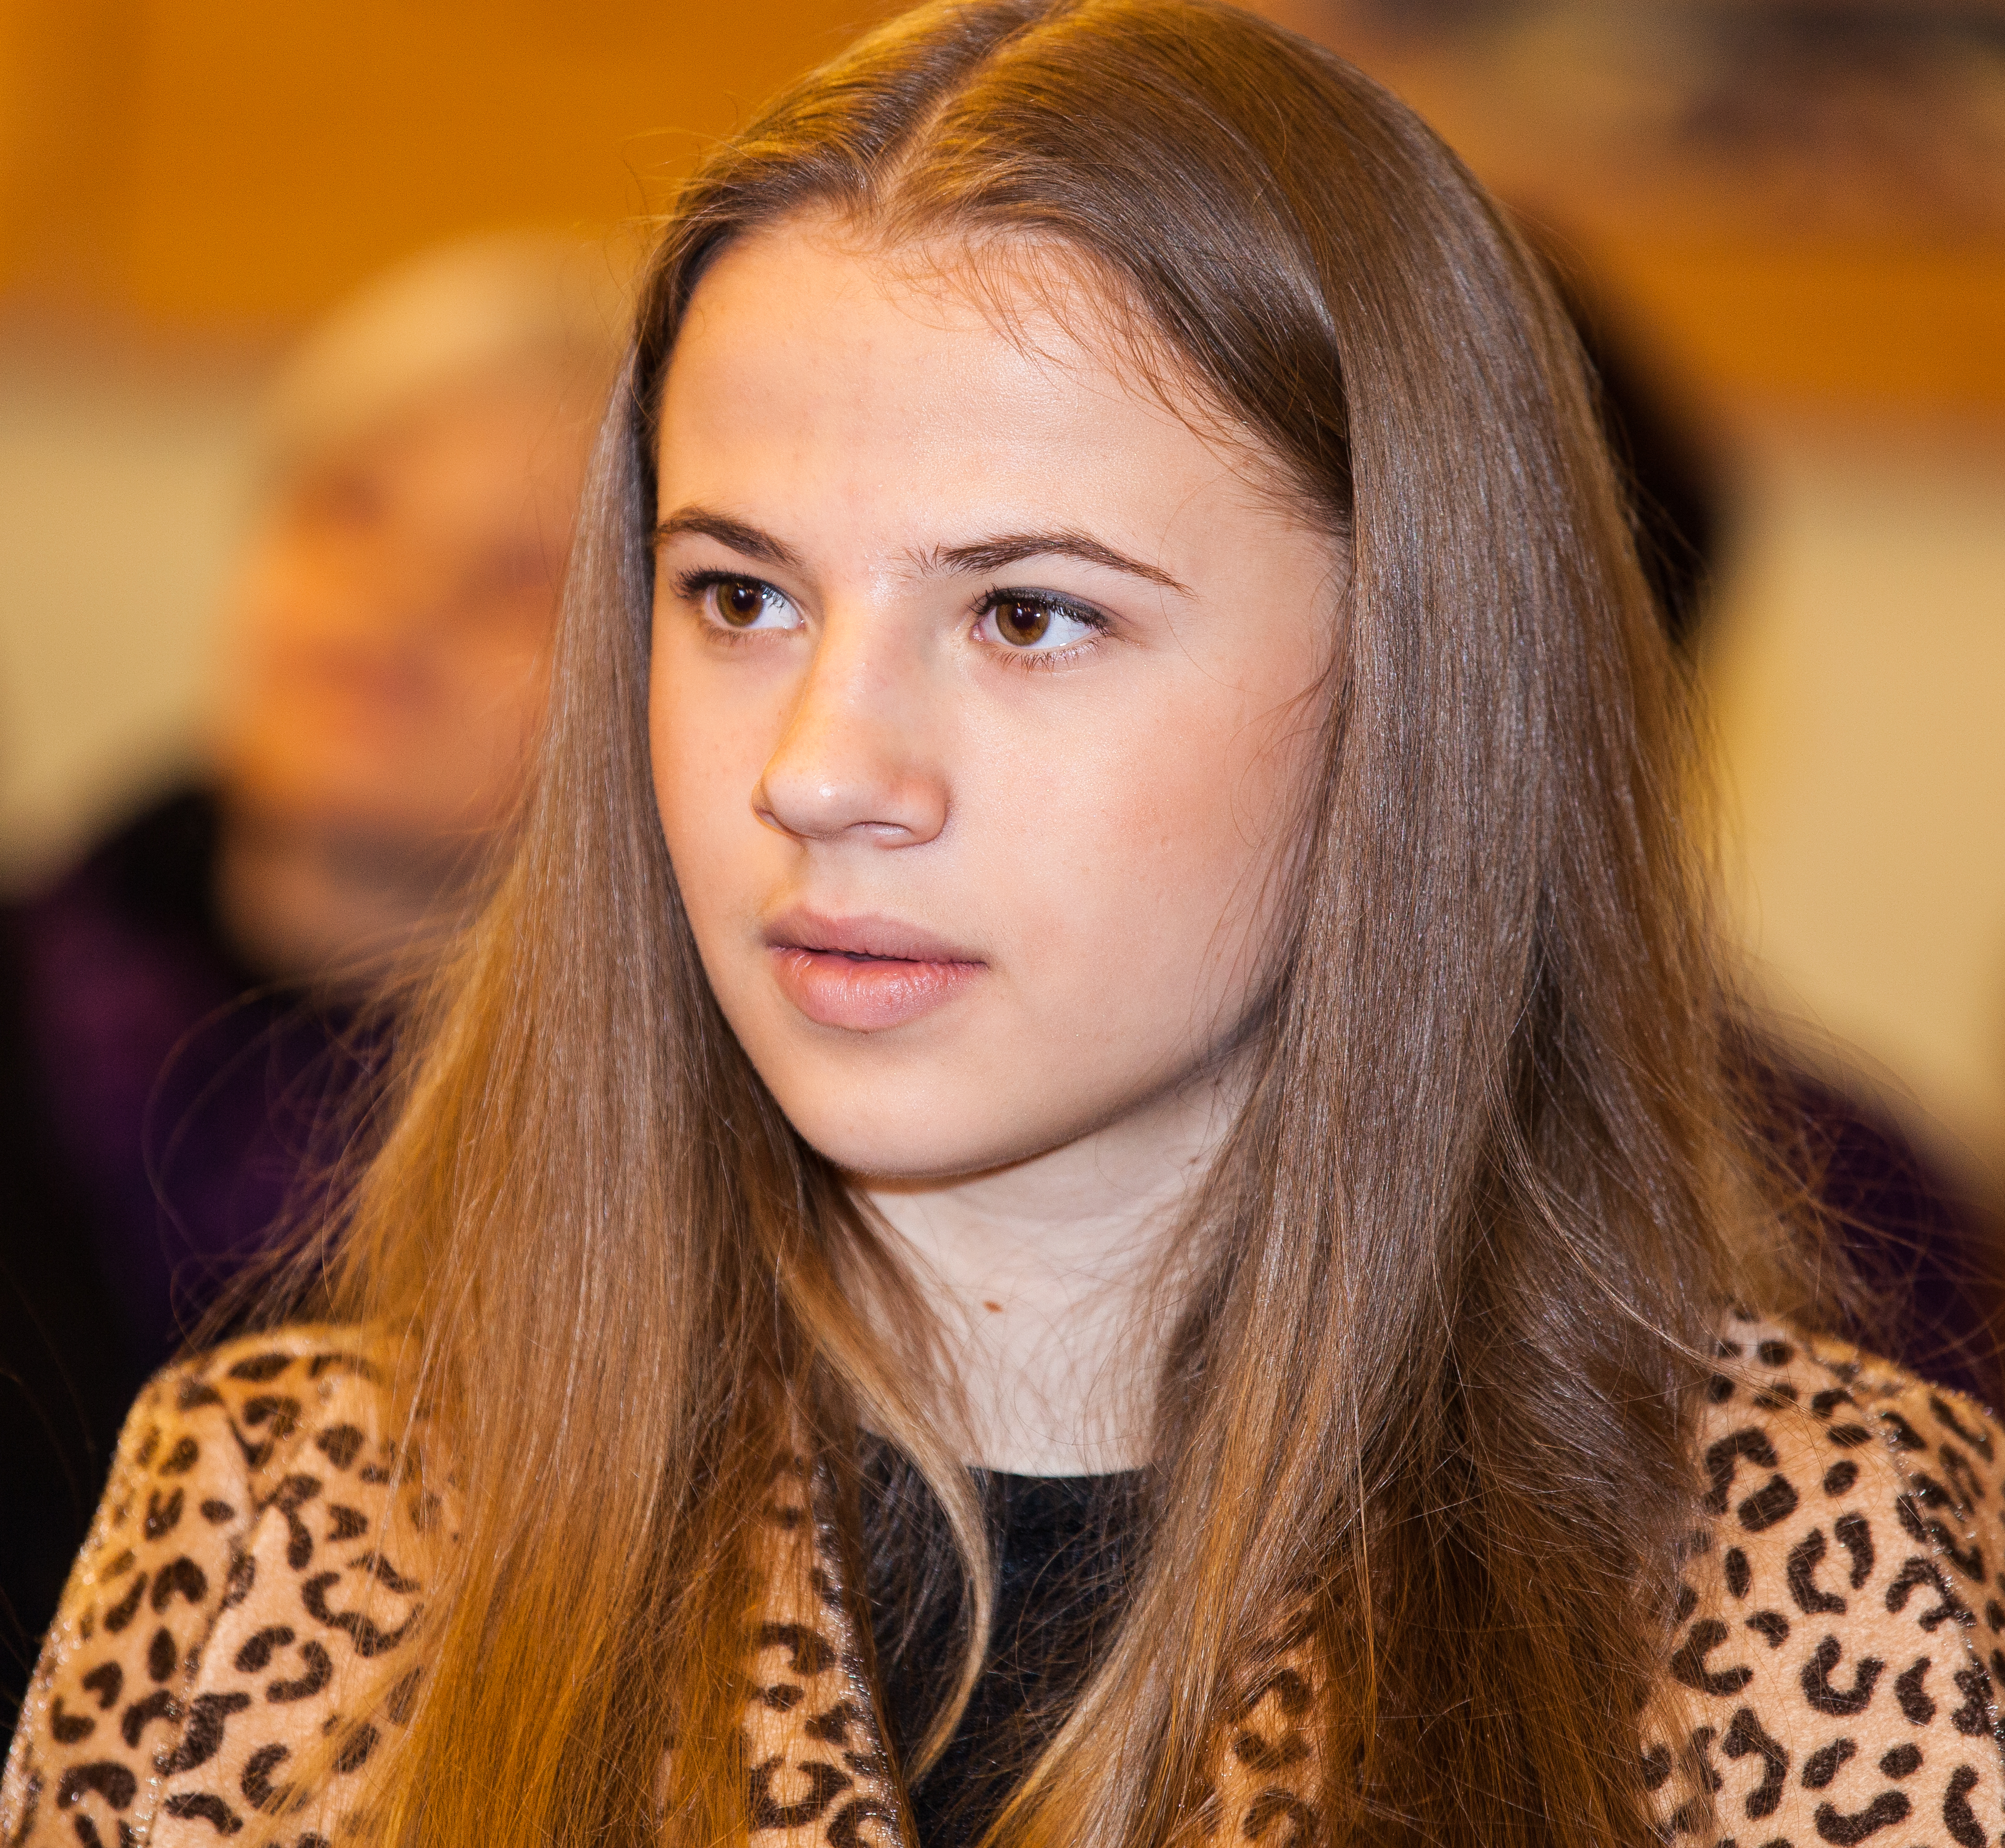 a cute Catholic girl in a church photographed in April 2014